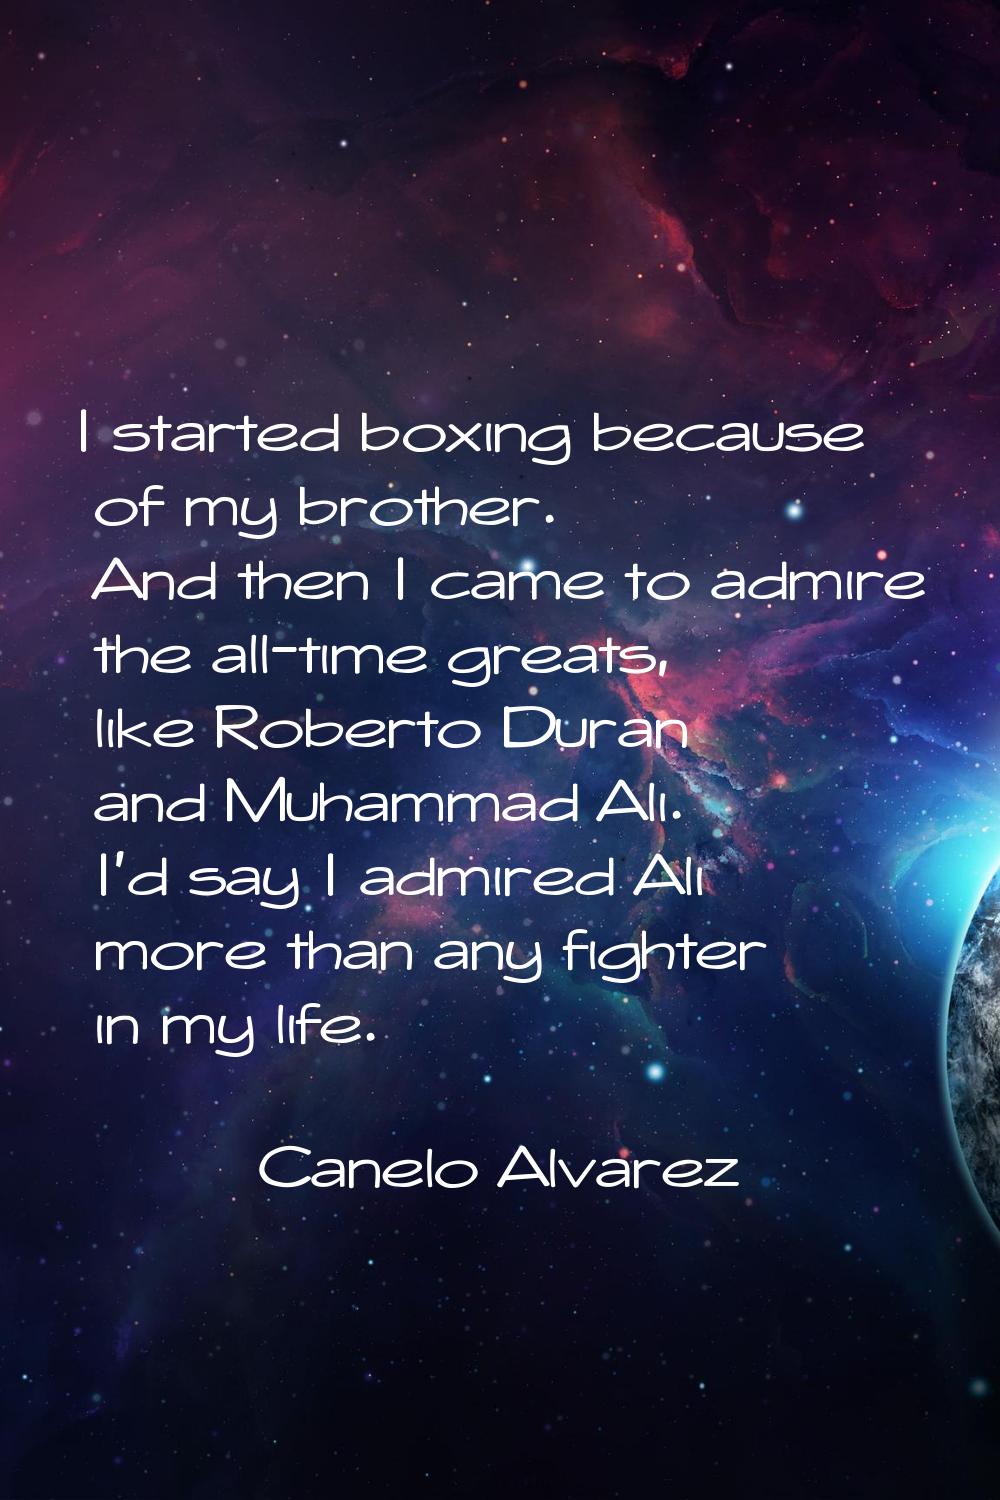 I started boxing because of my brother. And then I came to admire the all-time greats, like Roberto